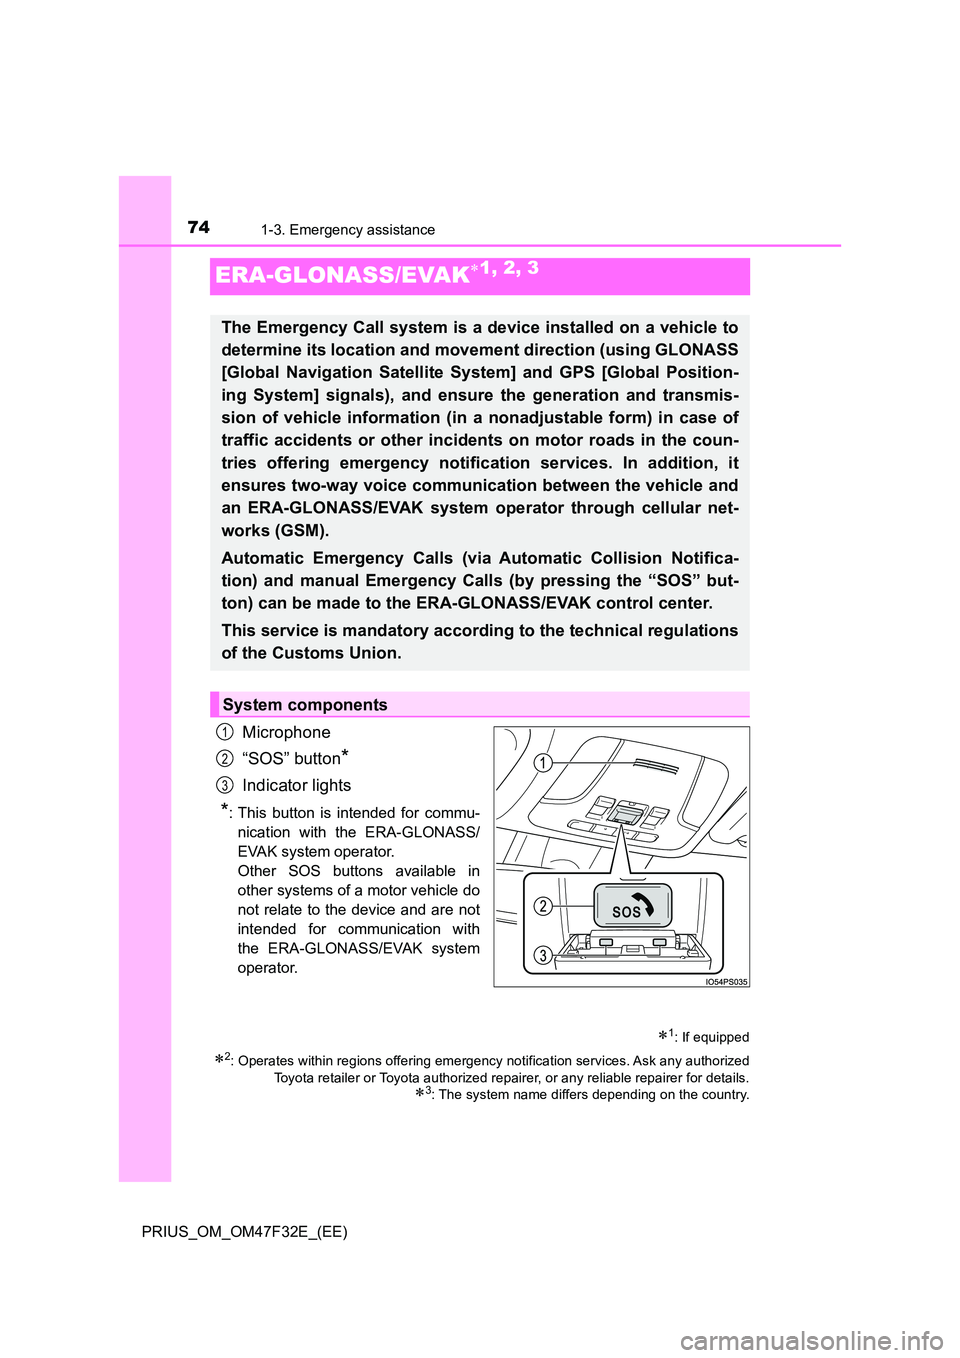 TOYOTA PRIUS 2023  Owners Manual 741-3. Emergency assistance
PRIUS_OM_OM47F32E_(EE)
ERA-GLONASS/EVAK1, 2, 3
Microphone 
“SOS” button*
Indicator lights
*: This button is intended for commu- 
nication with the ERA-GLONASS/
EVAK 